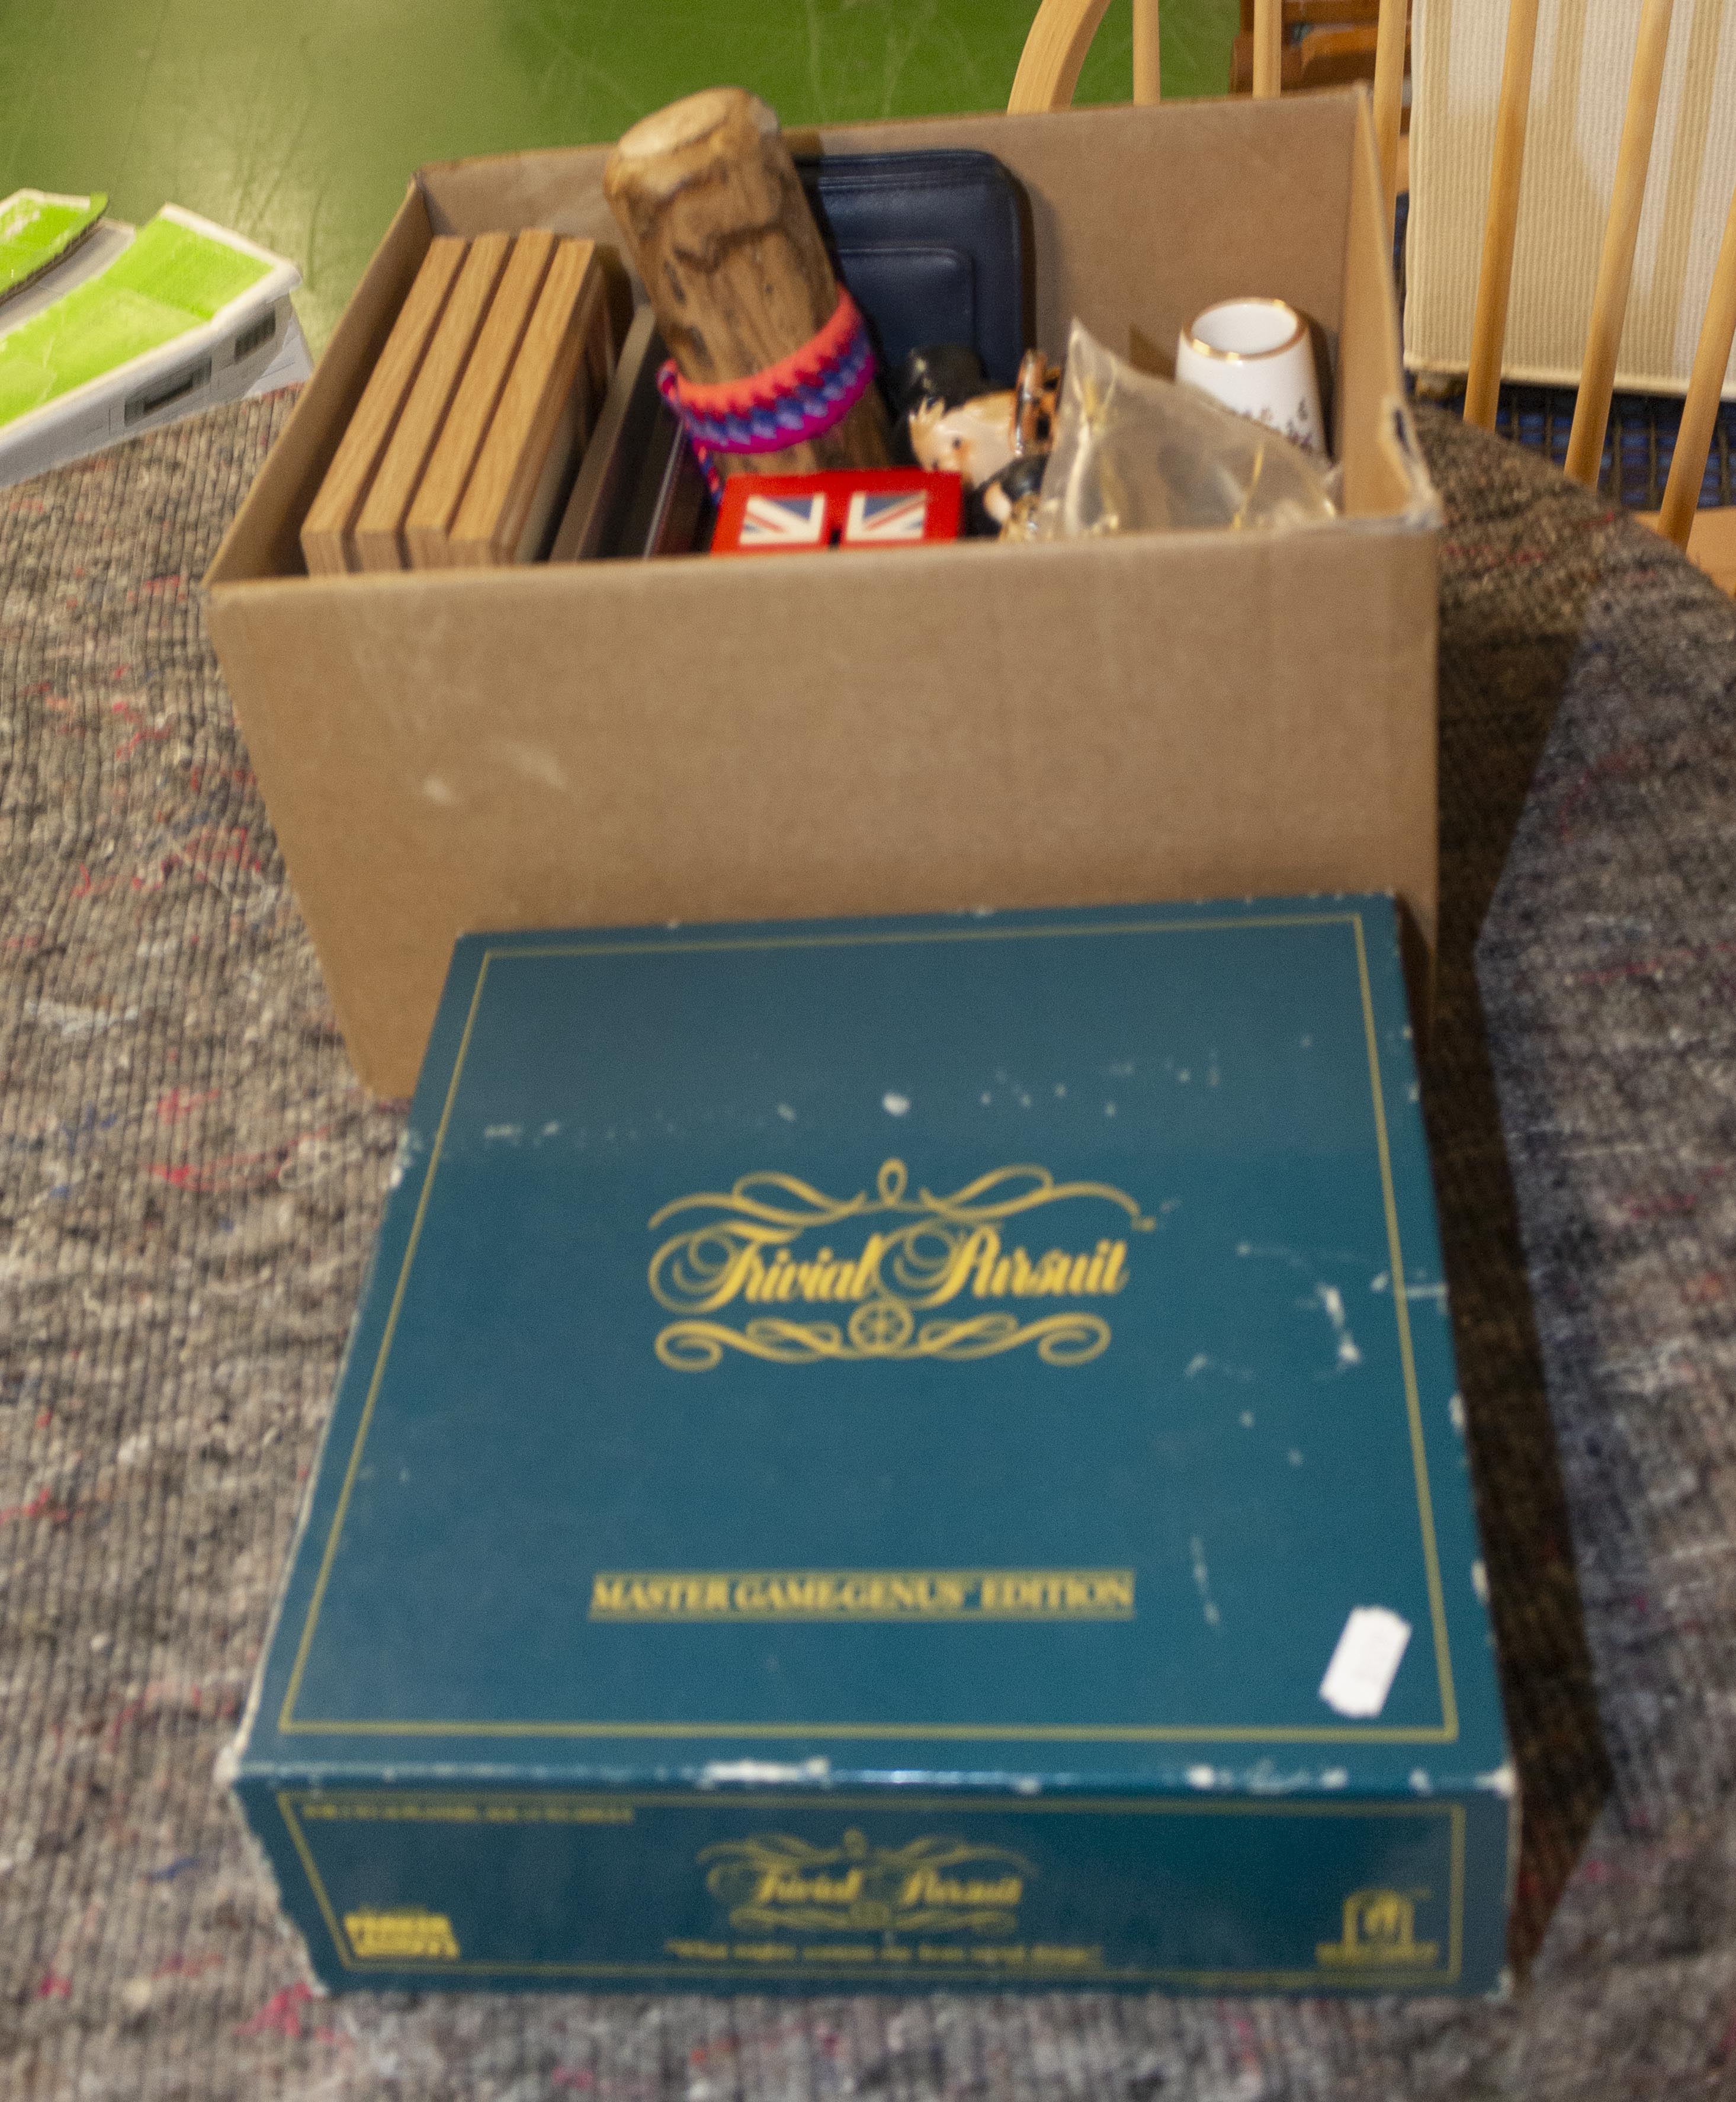 A box of assorted items and a Trivial Pursuit game